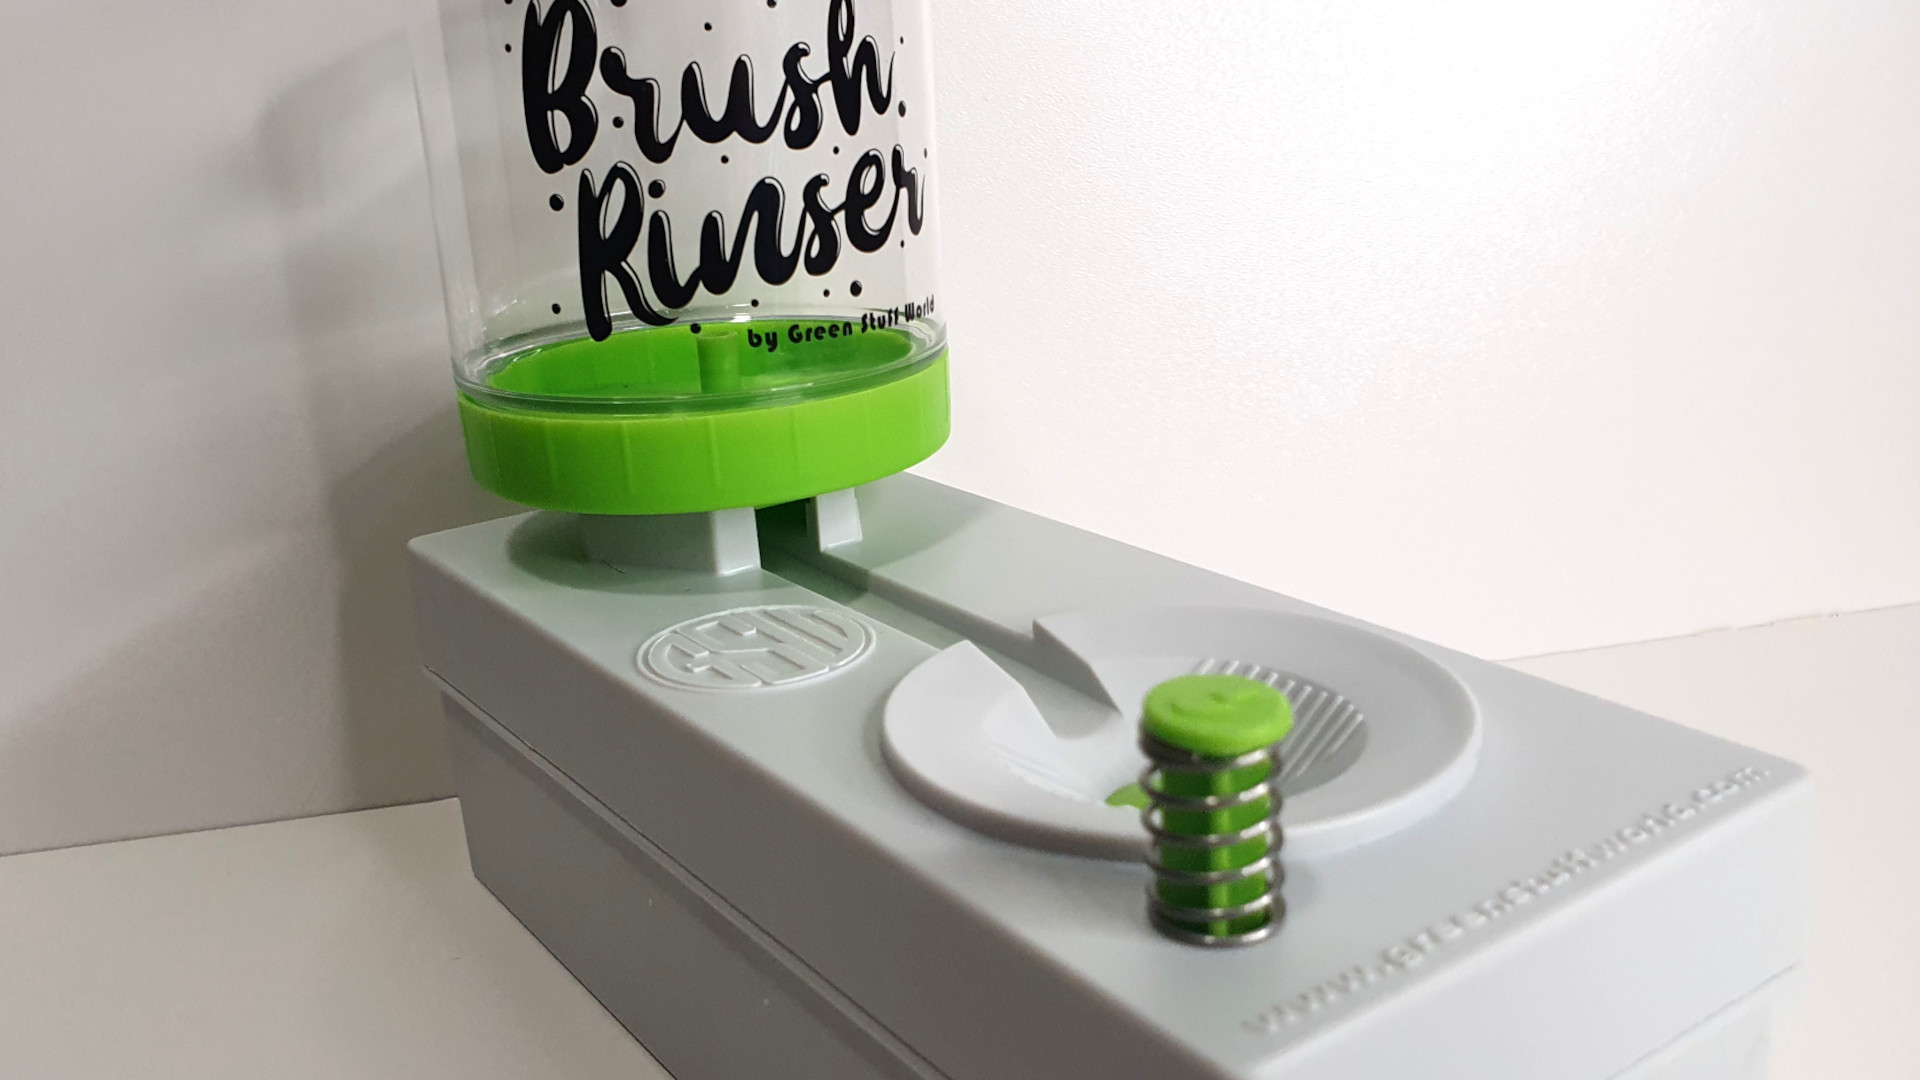 Green Stuff World on X: The Brush Rinser provides clean fresh water  conveniently when brush-painting without the clutter and inconvenience of  multiple rinse containers, accidental spills, or trips to the sink.   #